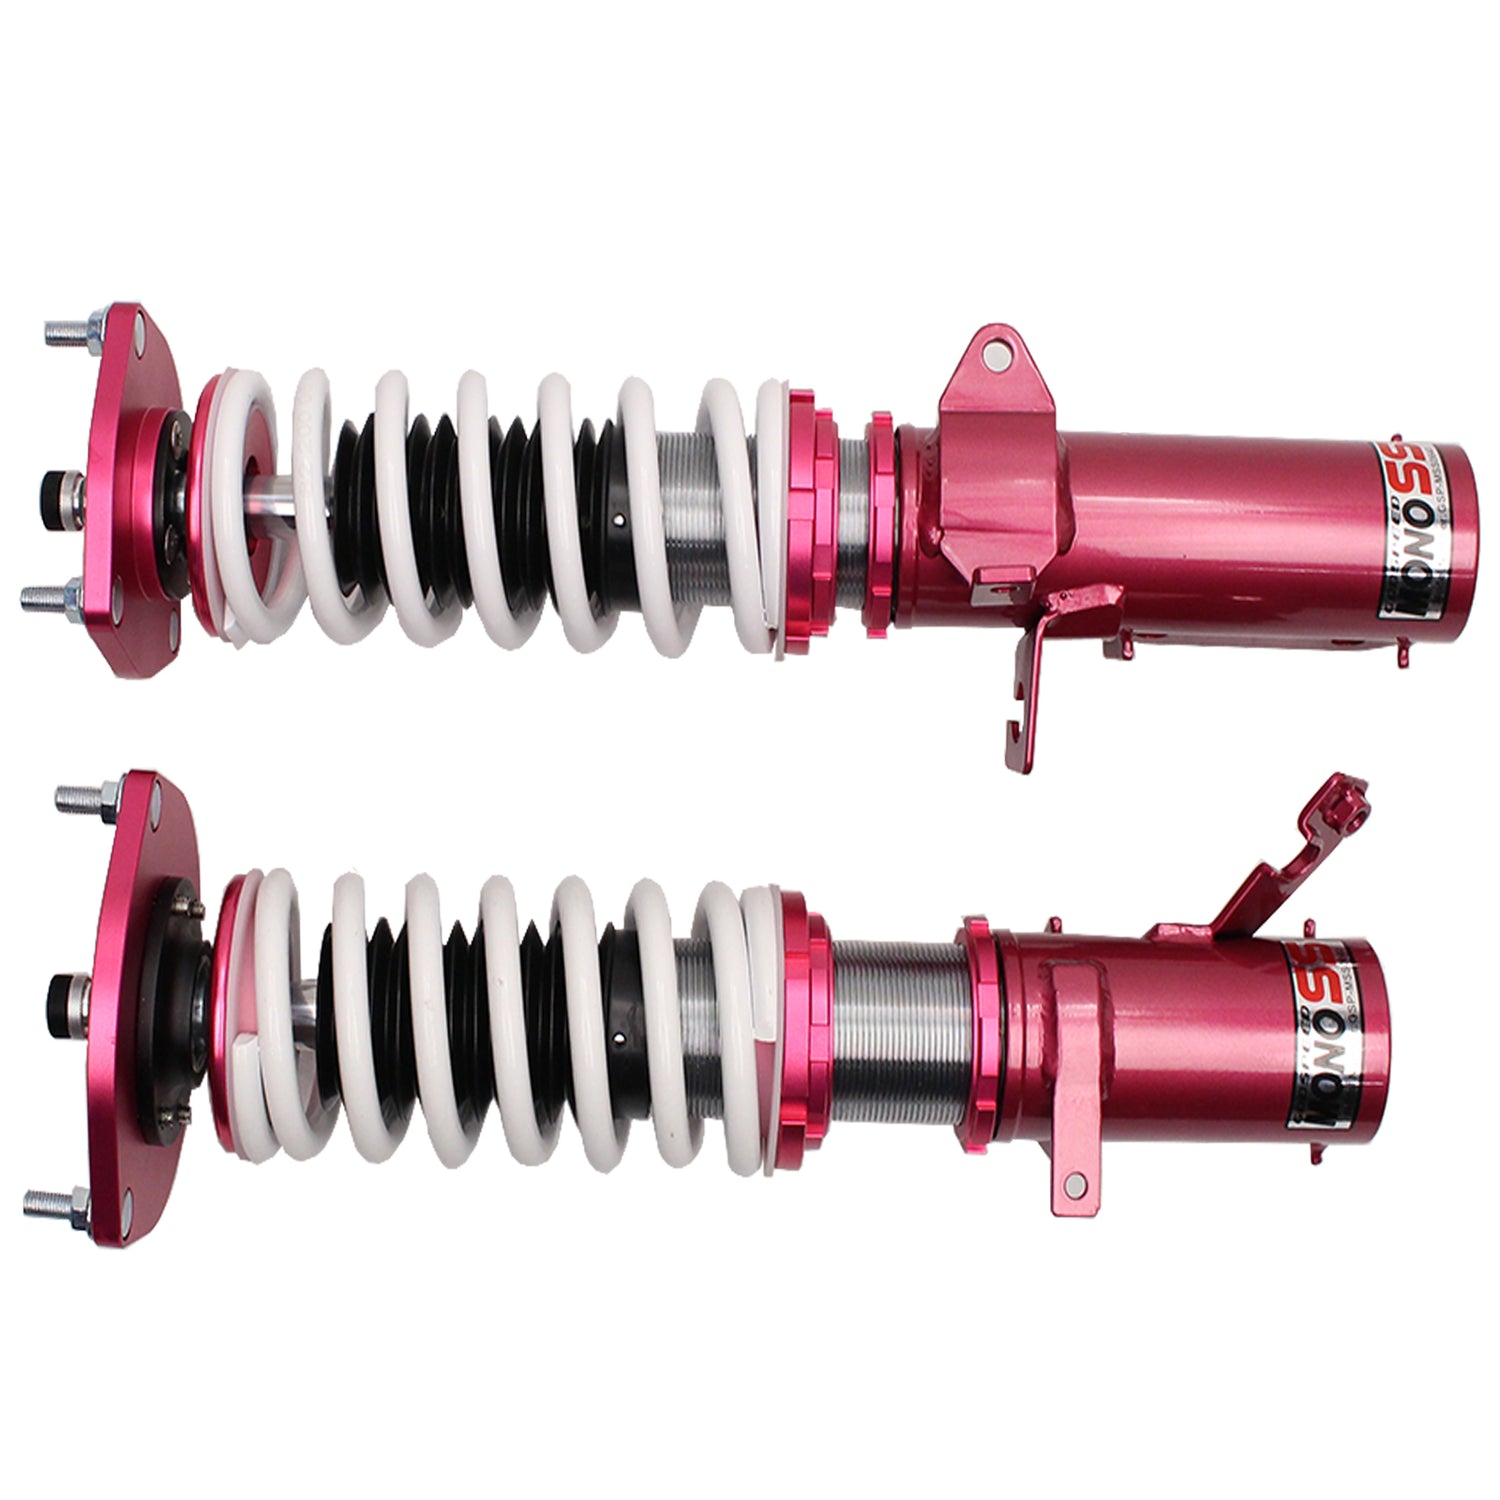 Godspeed MSS0640 MonoSS Coilover Lowering Kit, Fully Adjustable, Ride Height, Spring Tension And 16 Click Damping, Toyota Corolla(AE92/AE101/AE111) 1987-02